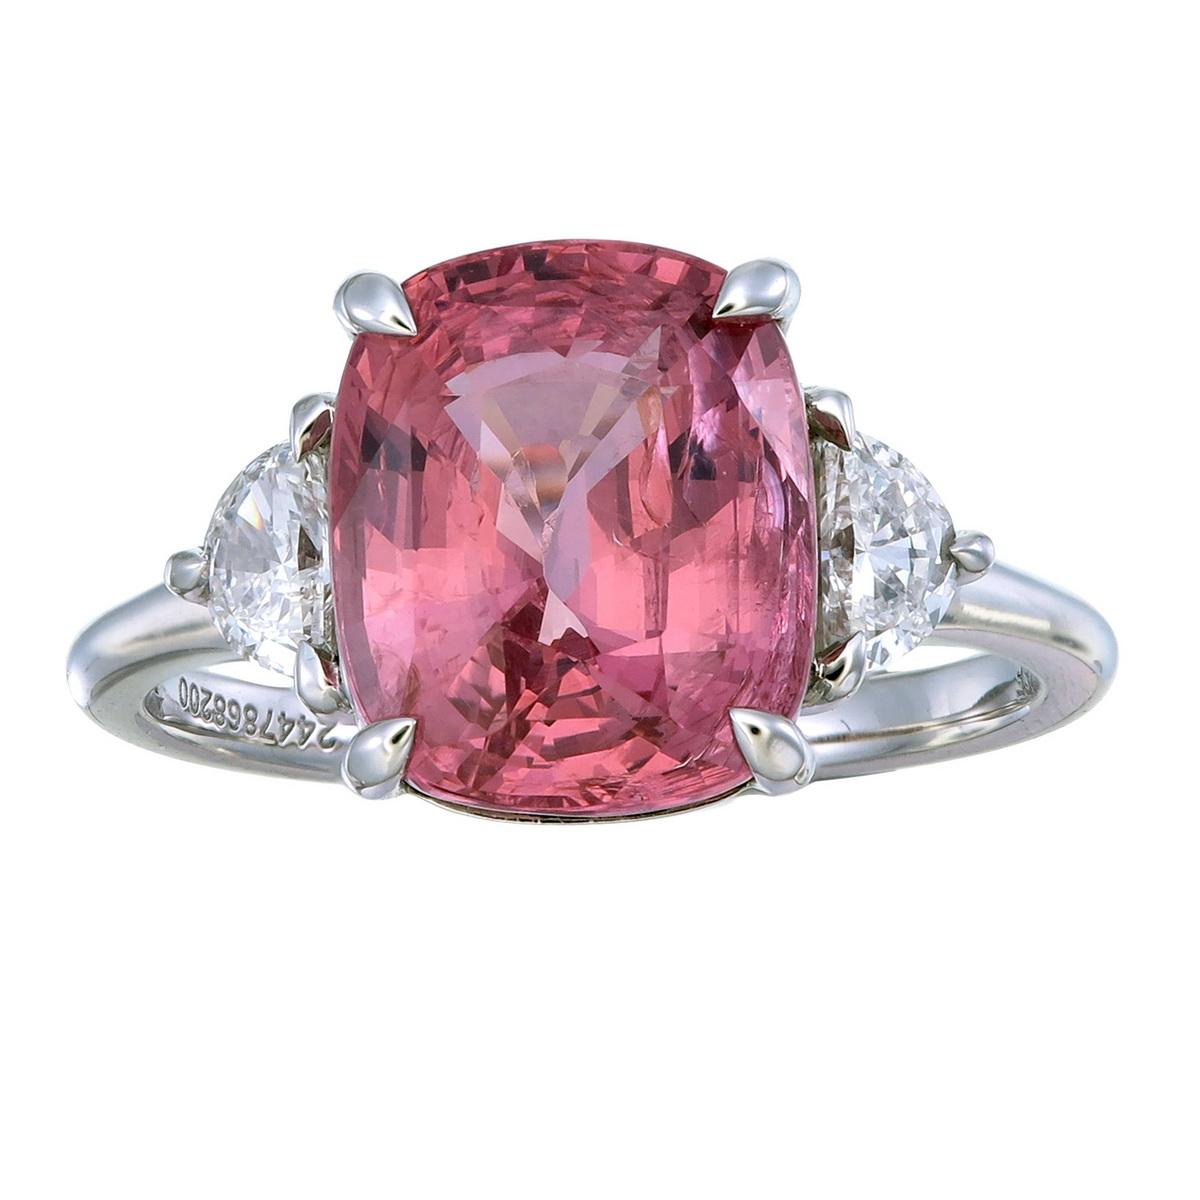 Orloff of Denmark;
With two VS1, G-H Half-Moon Diamonds on each side, this substantial 5.07 carat Pink Spinel is the focal-point of this Three-Stone engagement ring. At over 5 carats with a soft yet prominent brilliance parred with a soothing pink